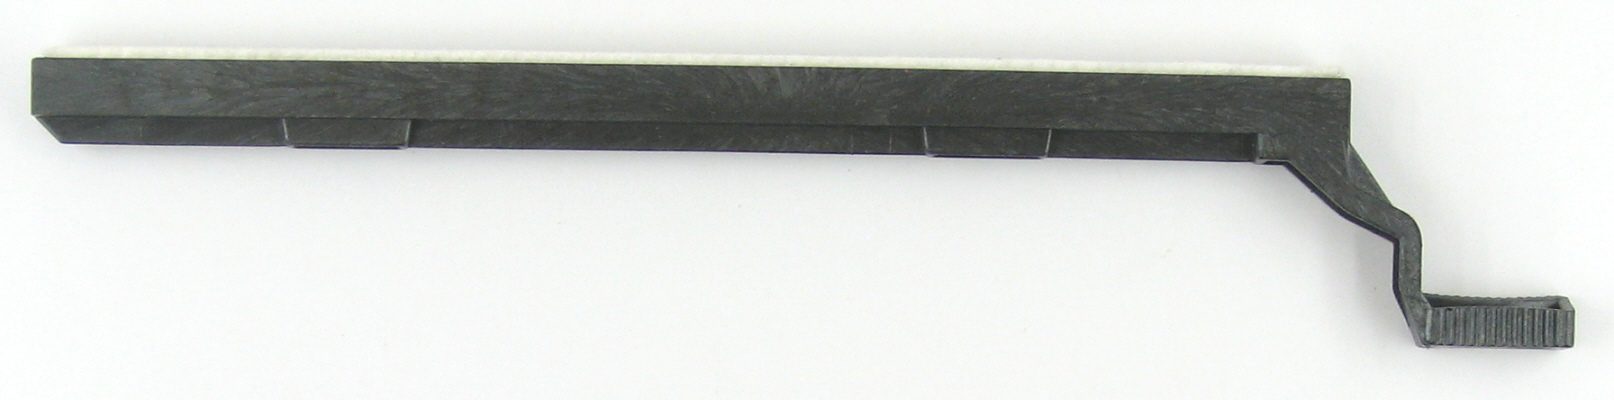 Wiper Fuser T630 T632 T634 Aftermarket Only (T630d X630 Mfp T632n X632e X632dte W/ Finisher)